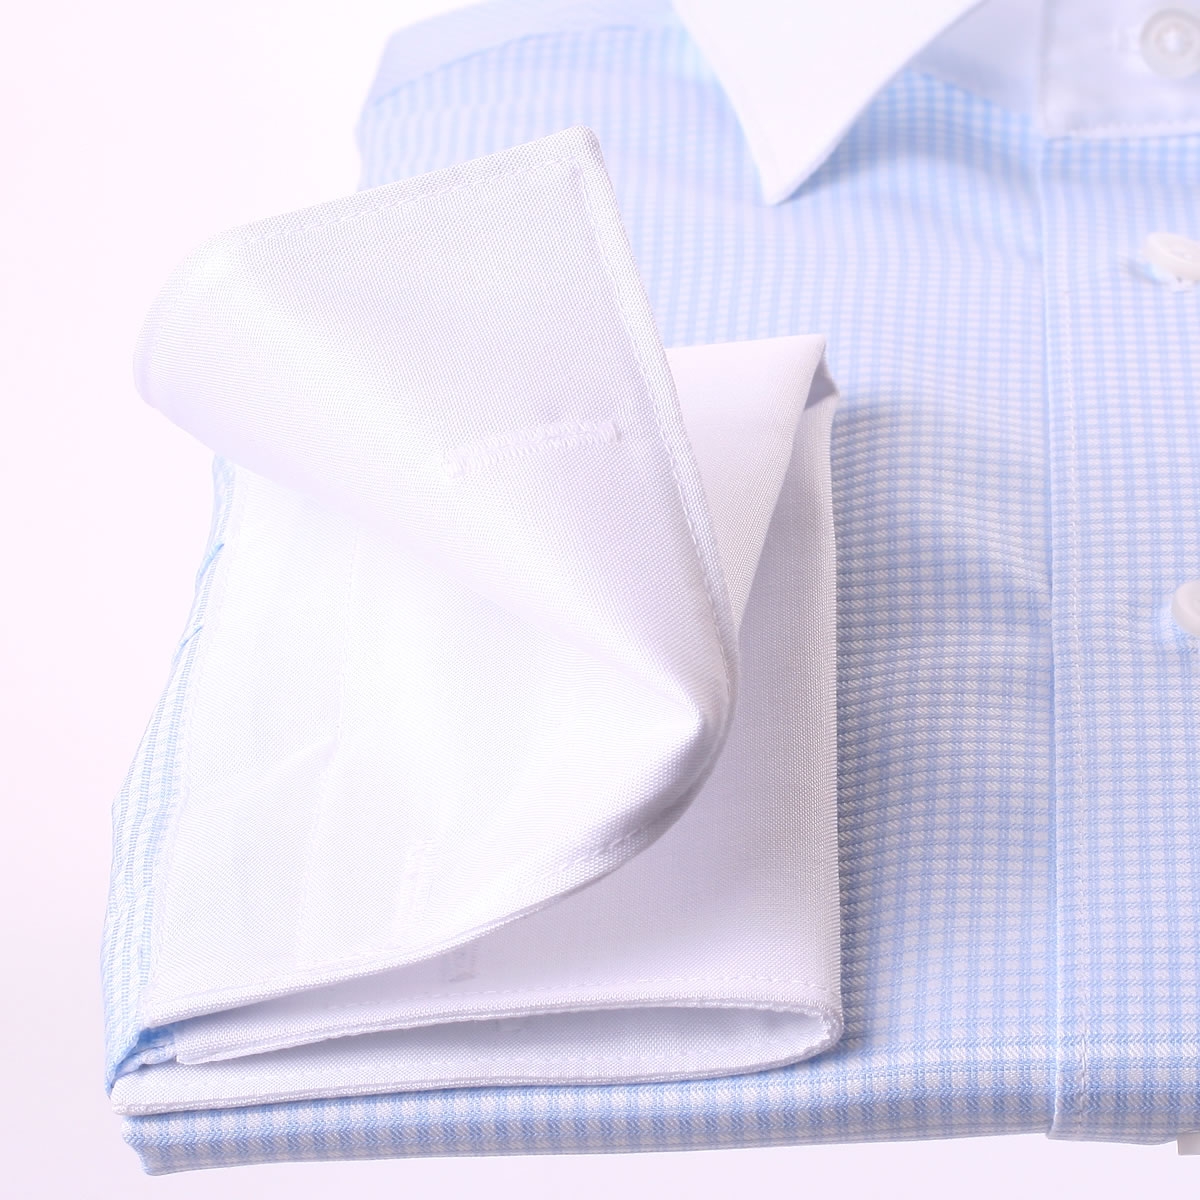 Blue and white checkered french cuff shirt, white collar and cuffs